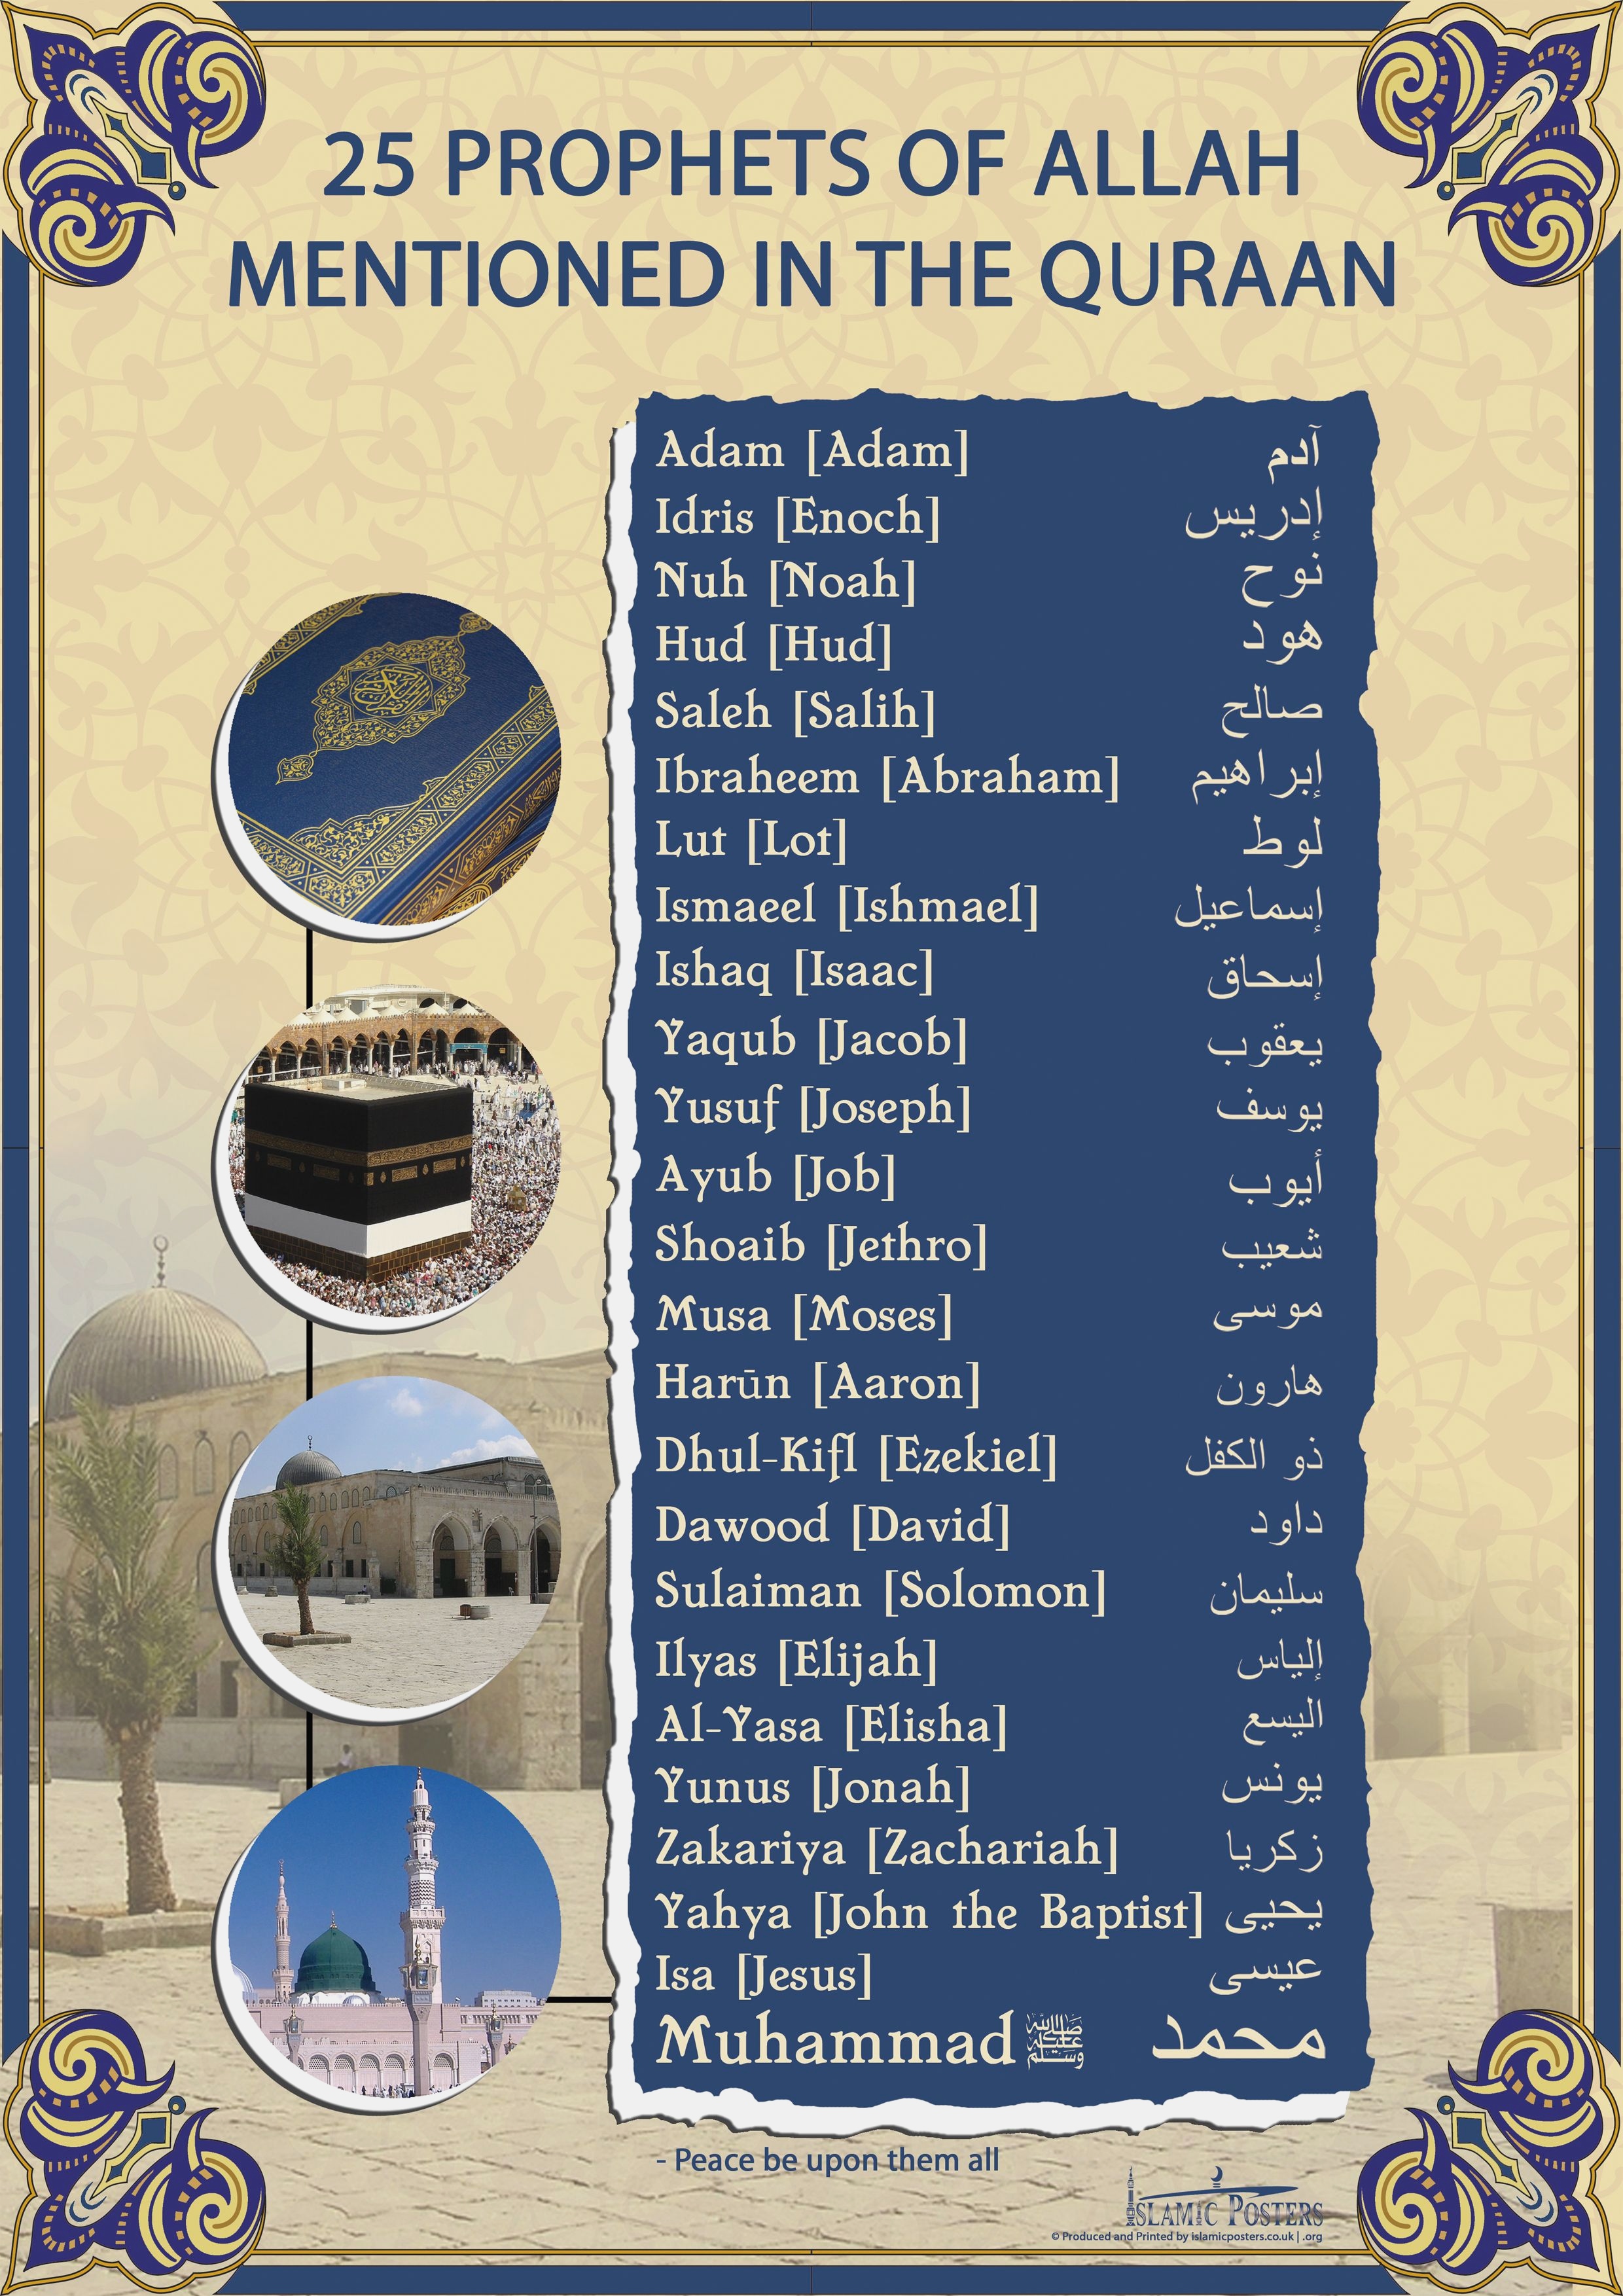 Desertrose 25 Prophets Of Allah Mentioned In The Quran - Al-masjid Al-nabawi , HD Wallpaper & Backgrounds